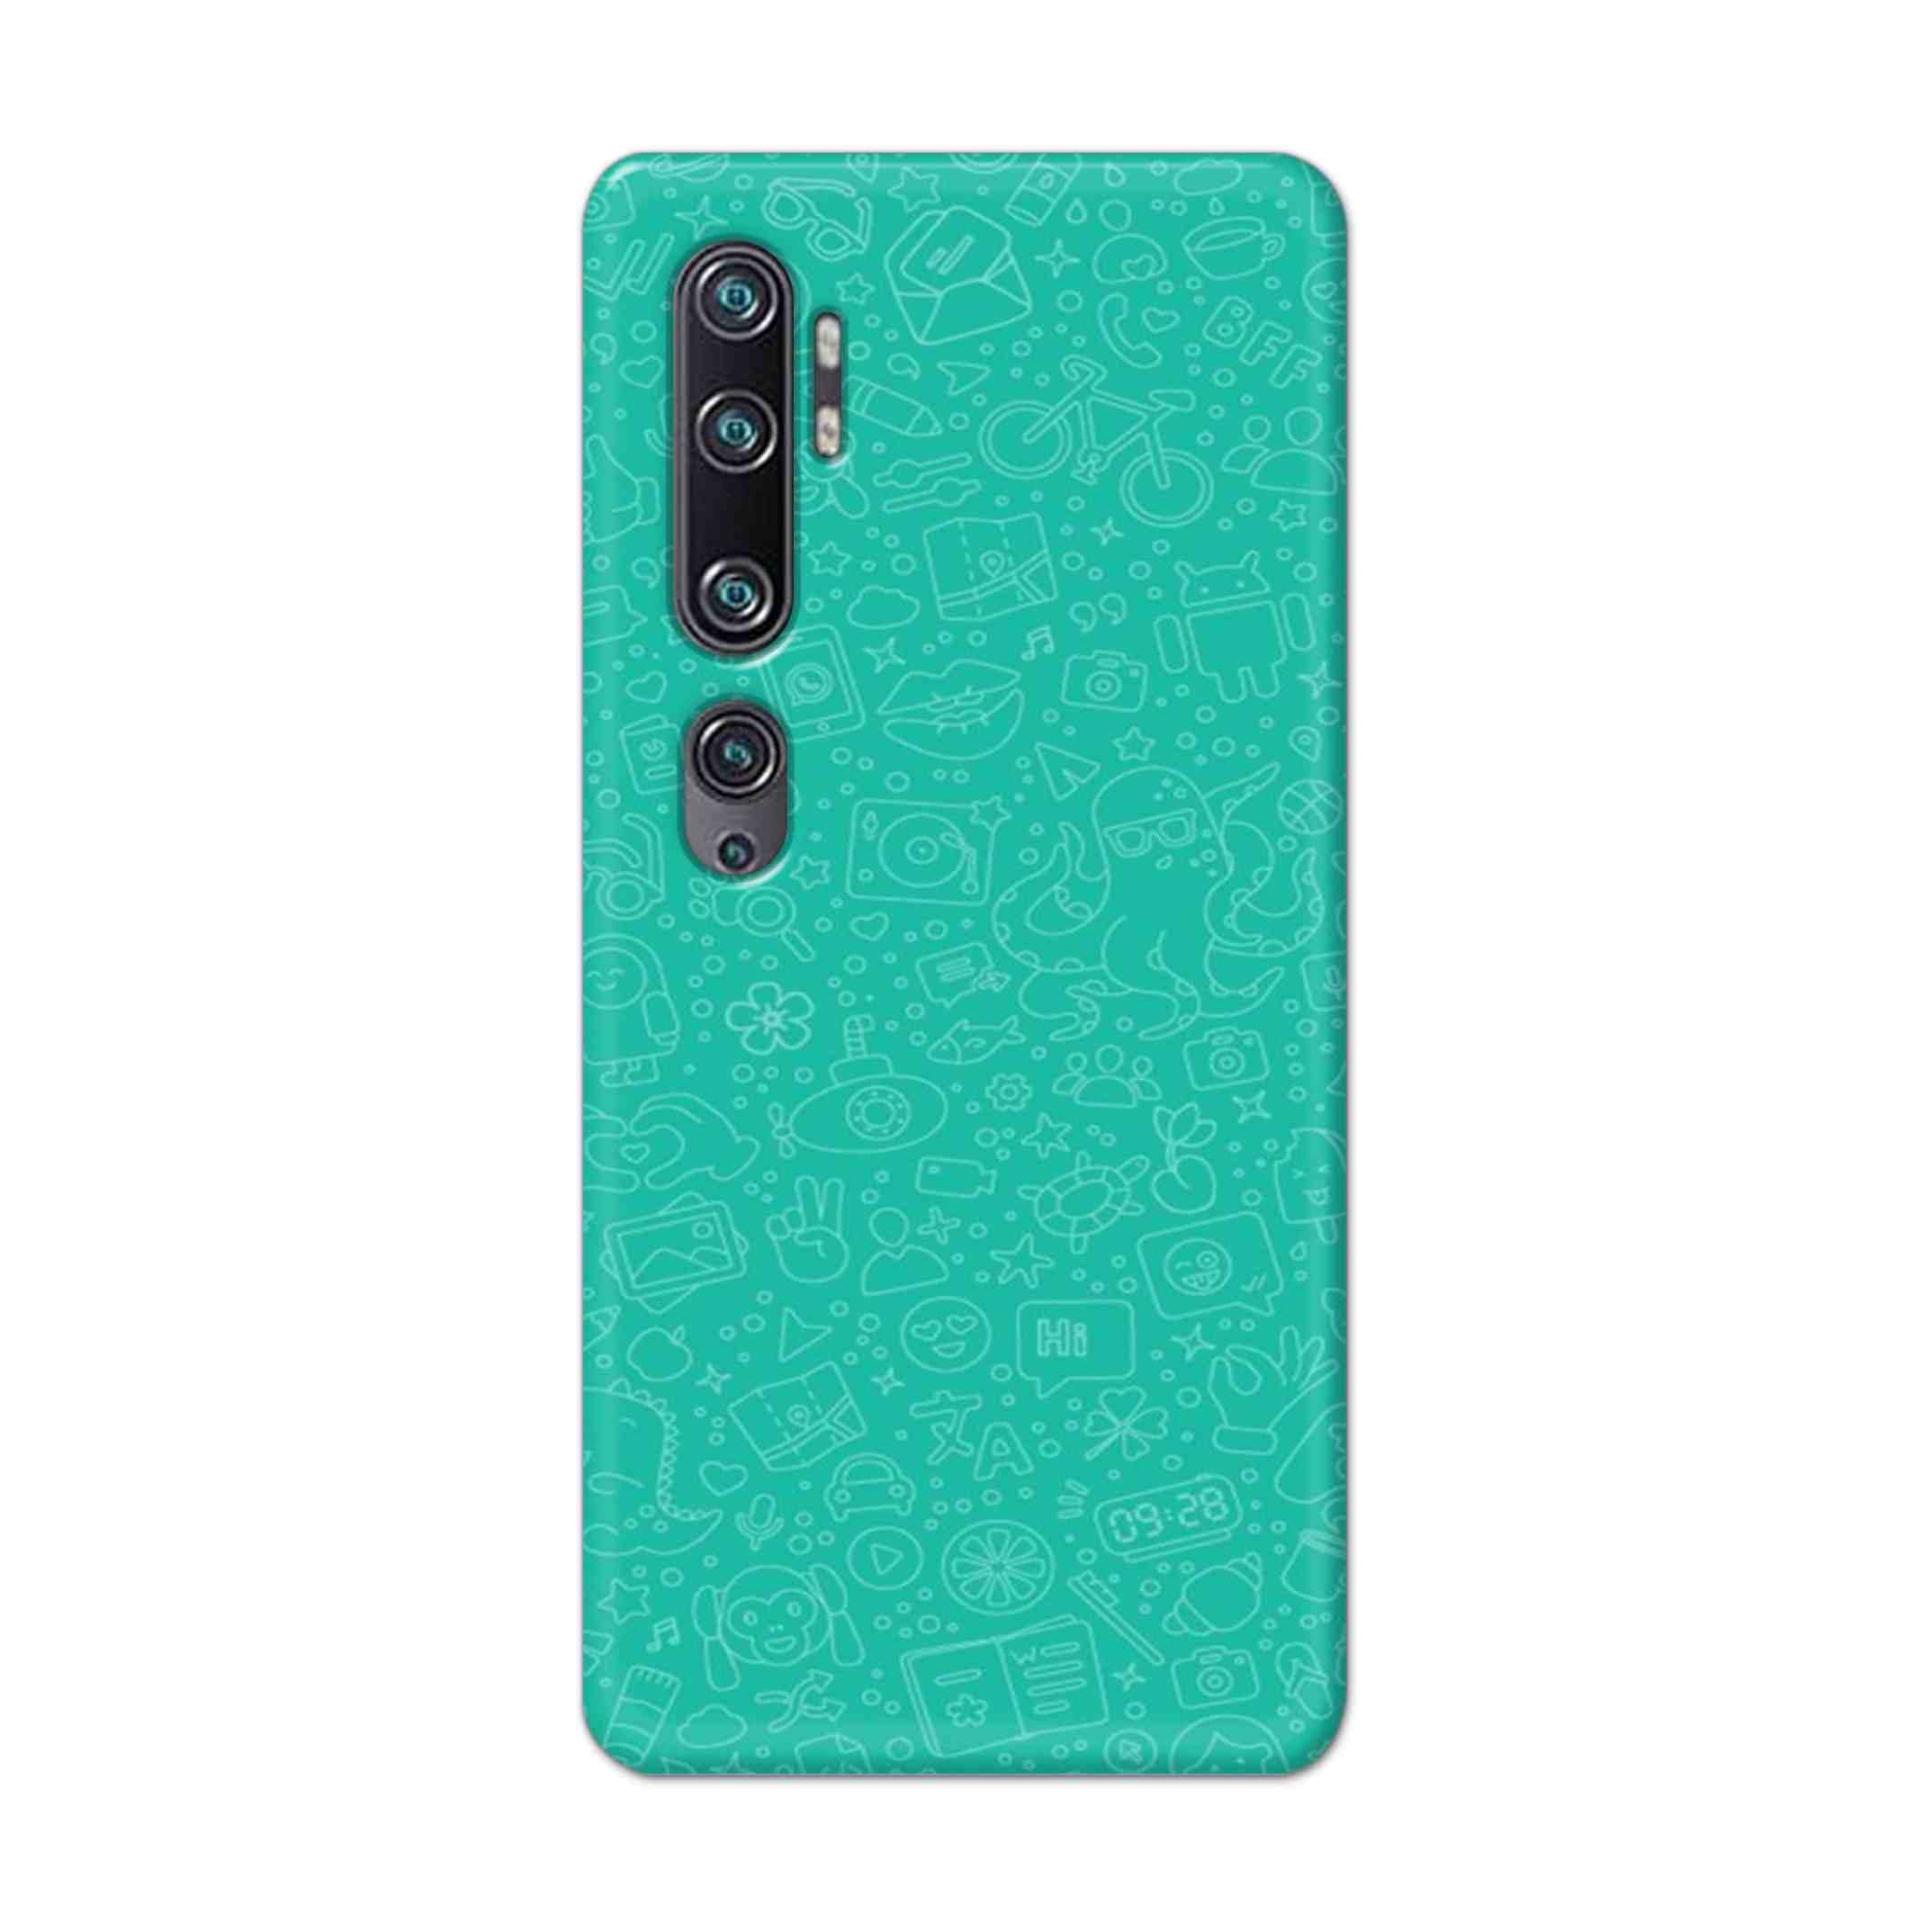 Buy Whatsapp Hard Back Mobile Phone Case Cover For Xiaomi Mi Note 10 Online